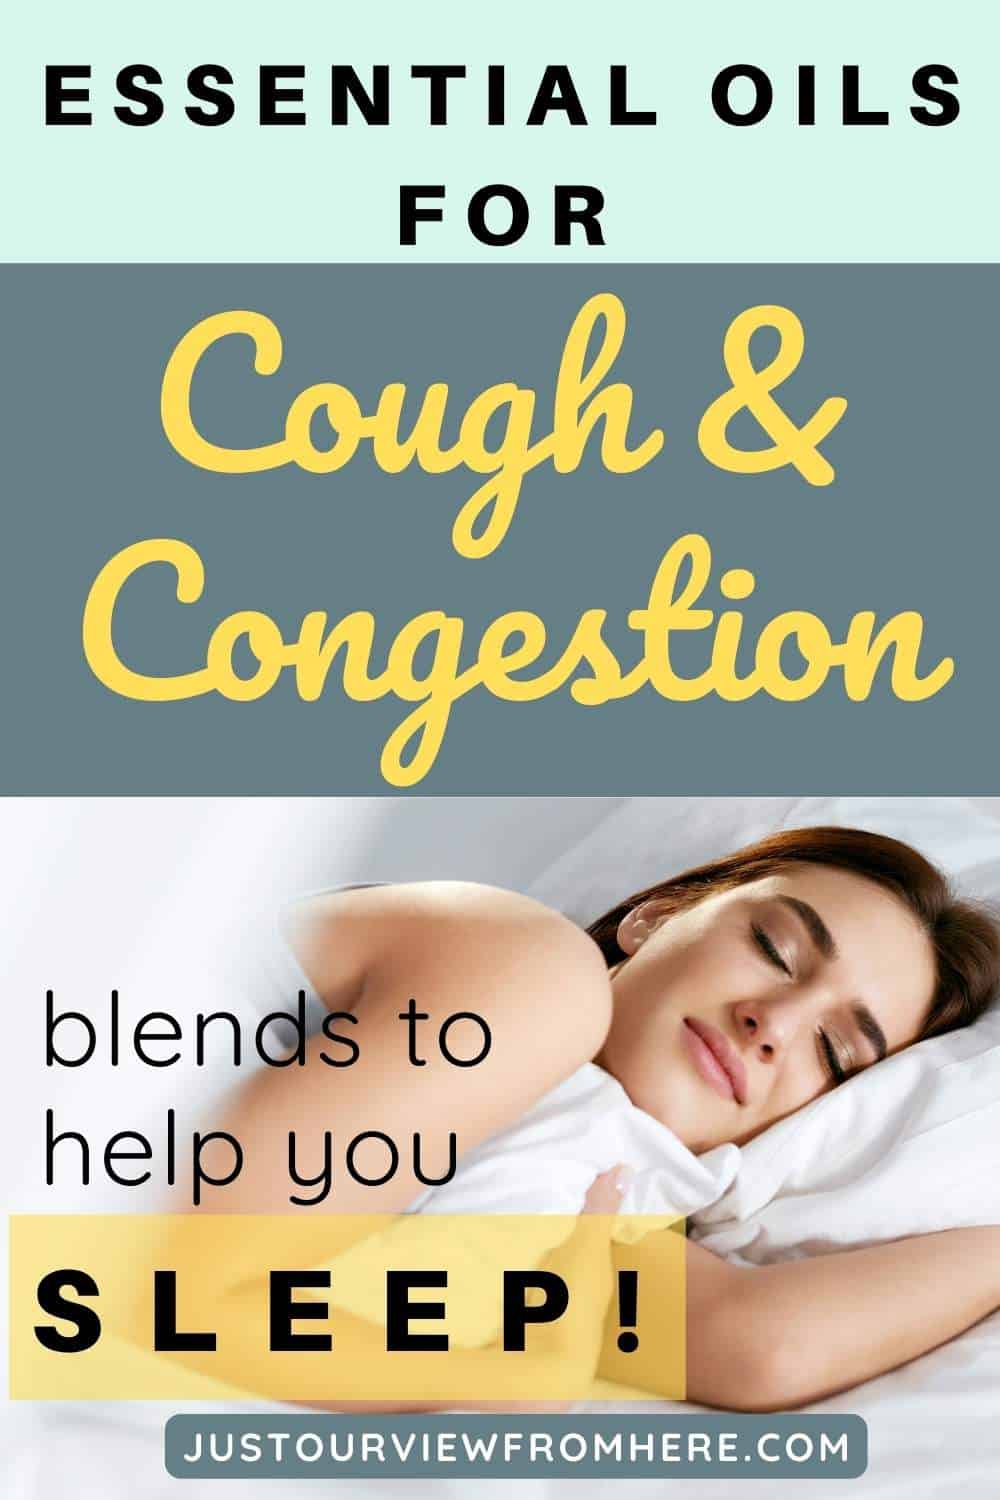 WOMAN SLEEPING PEACEFULLY, TEXT OVERLAY ESSENTIAL OILS FOR COUGH AND CONGESTIONS DIFFUSER BLENDS TO HELP YOU SLEPP